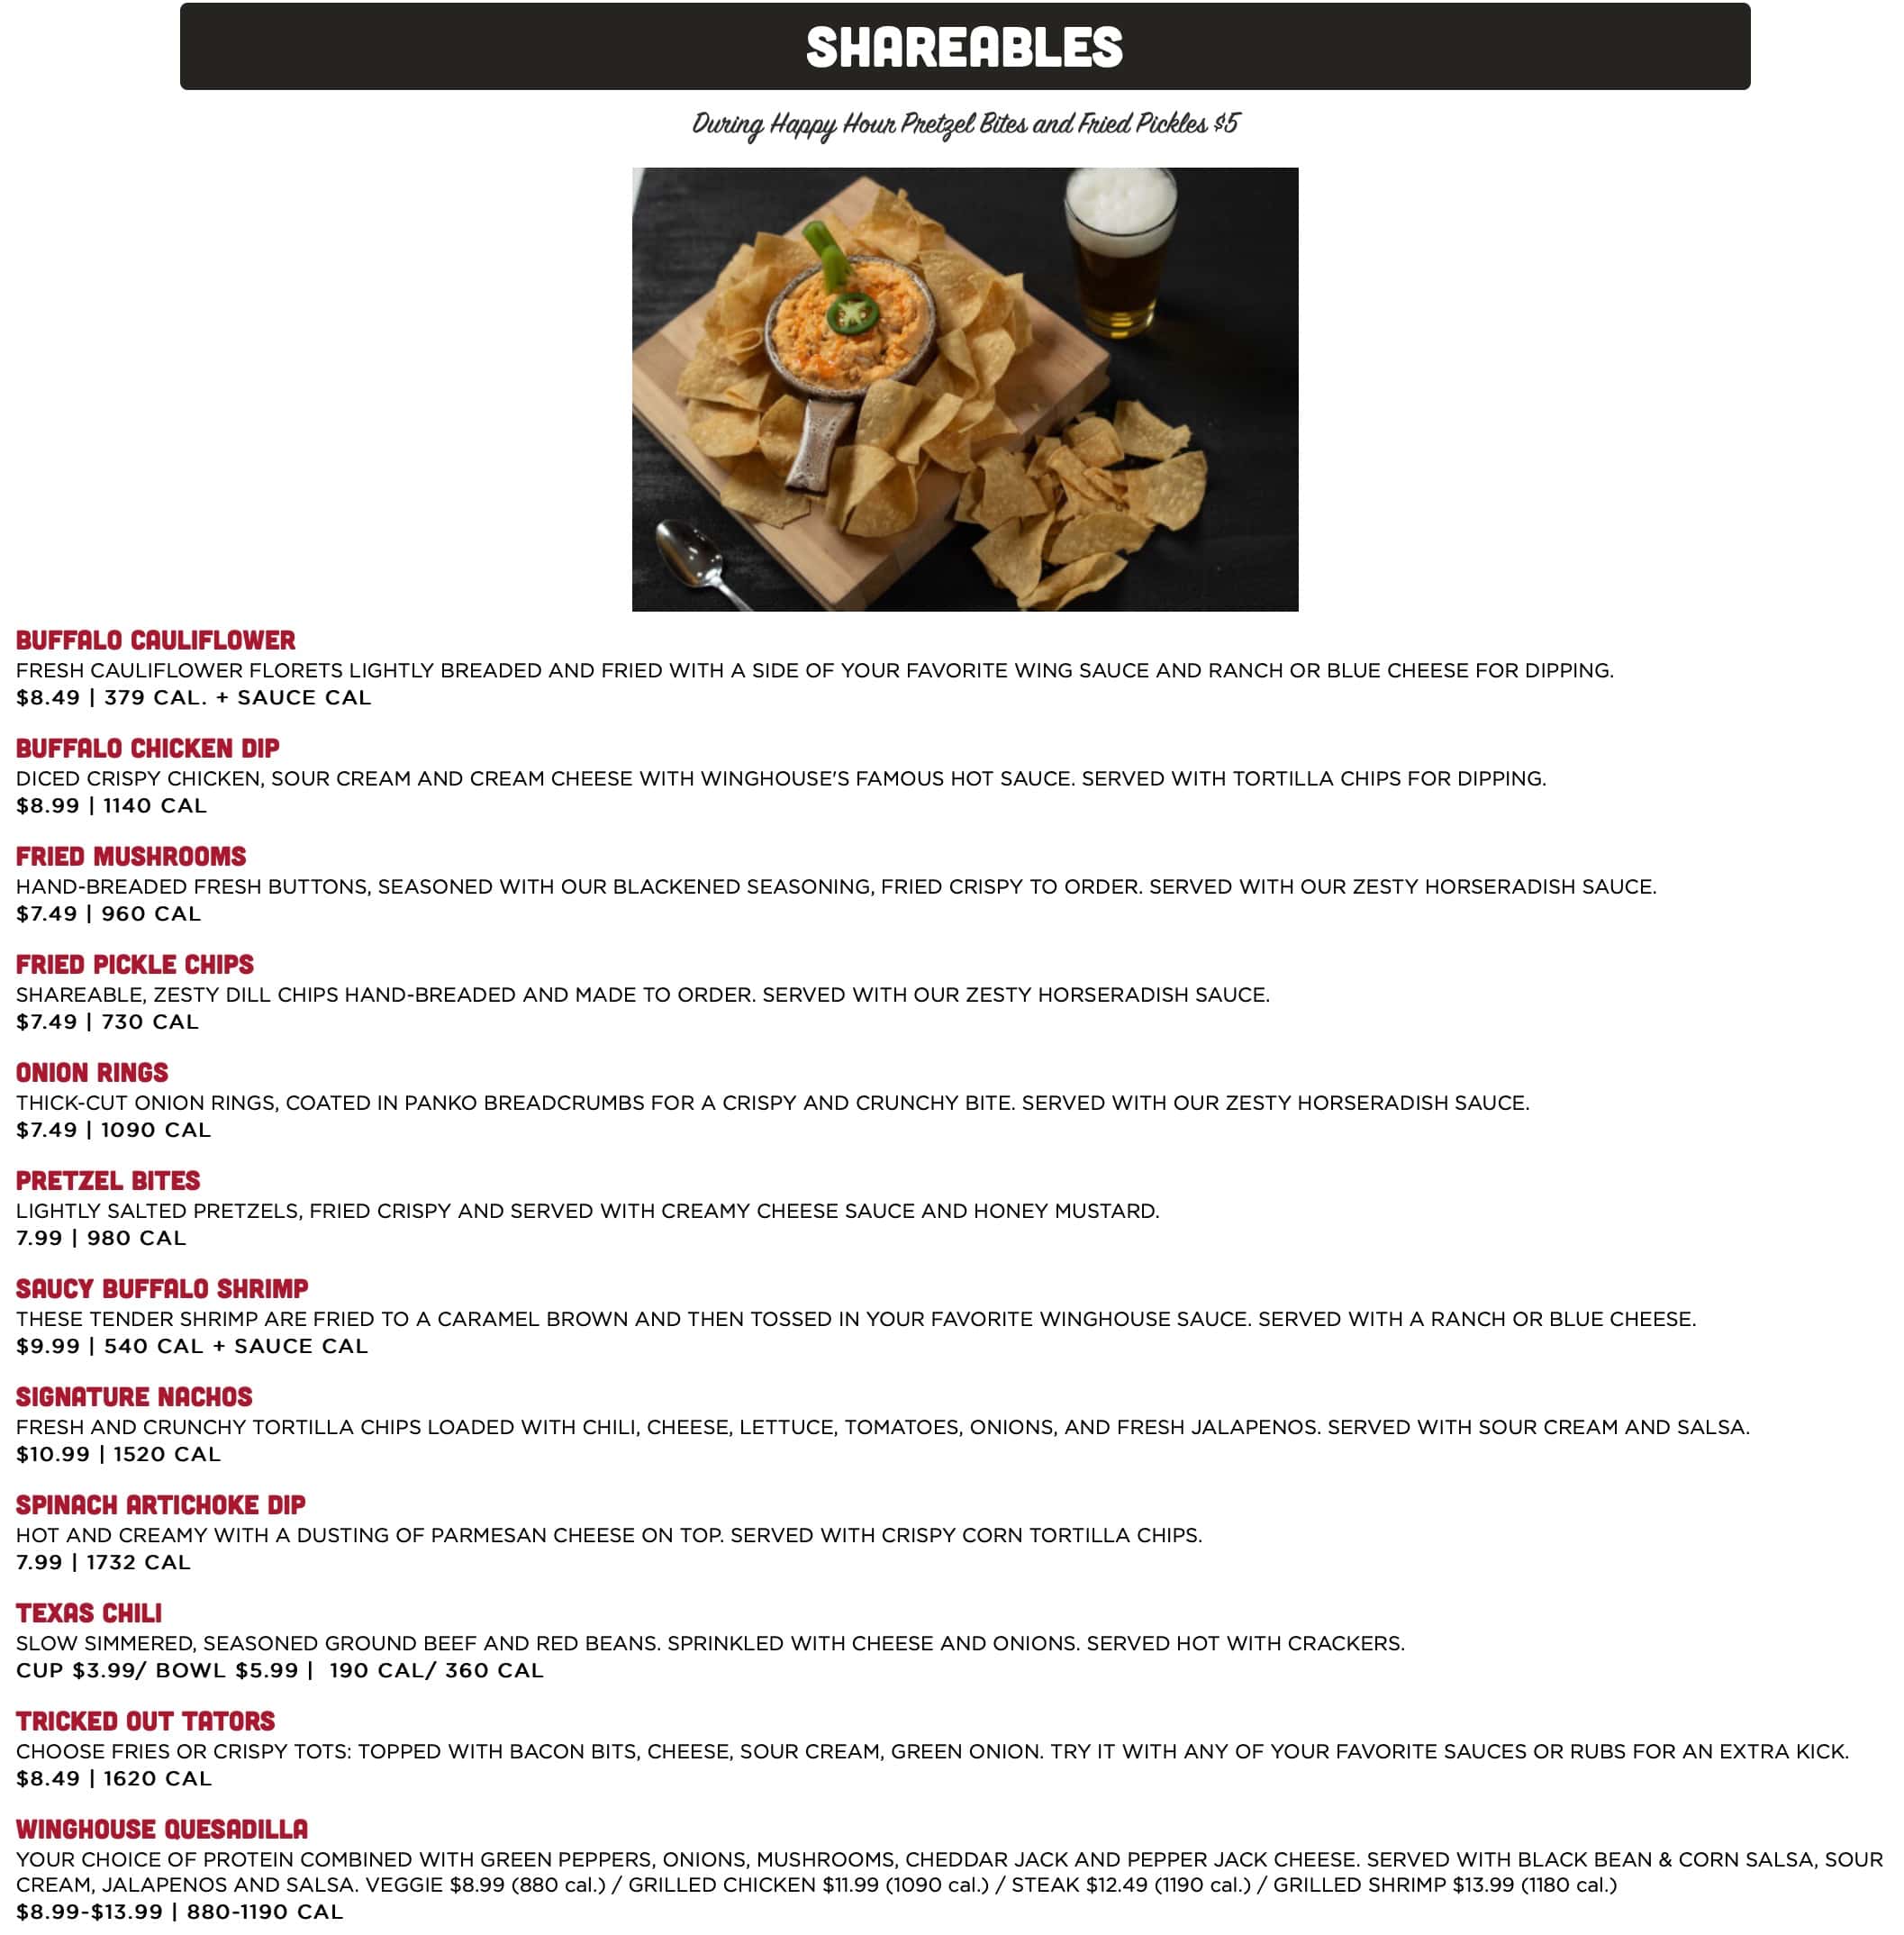 Ker's WingHouse Bar and Grill Shareables Menu